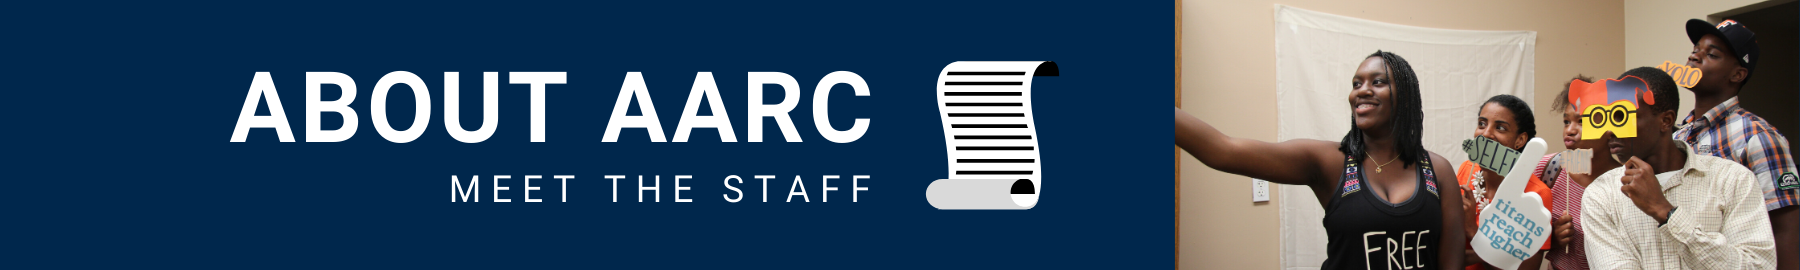 About AARC Meet the Staff banner